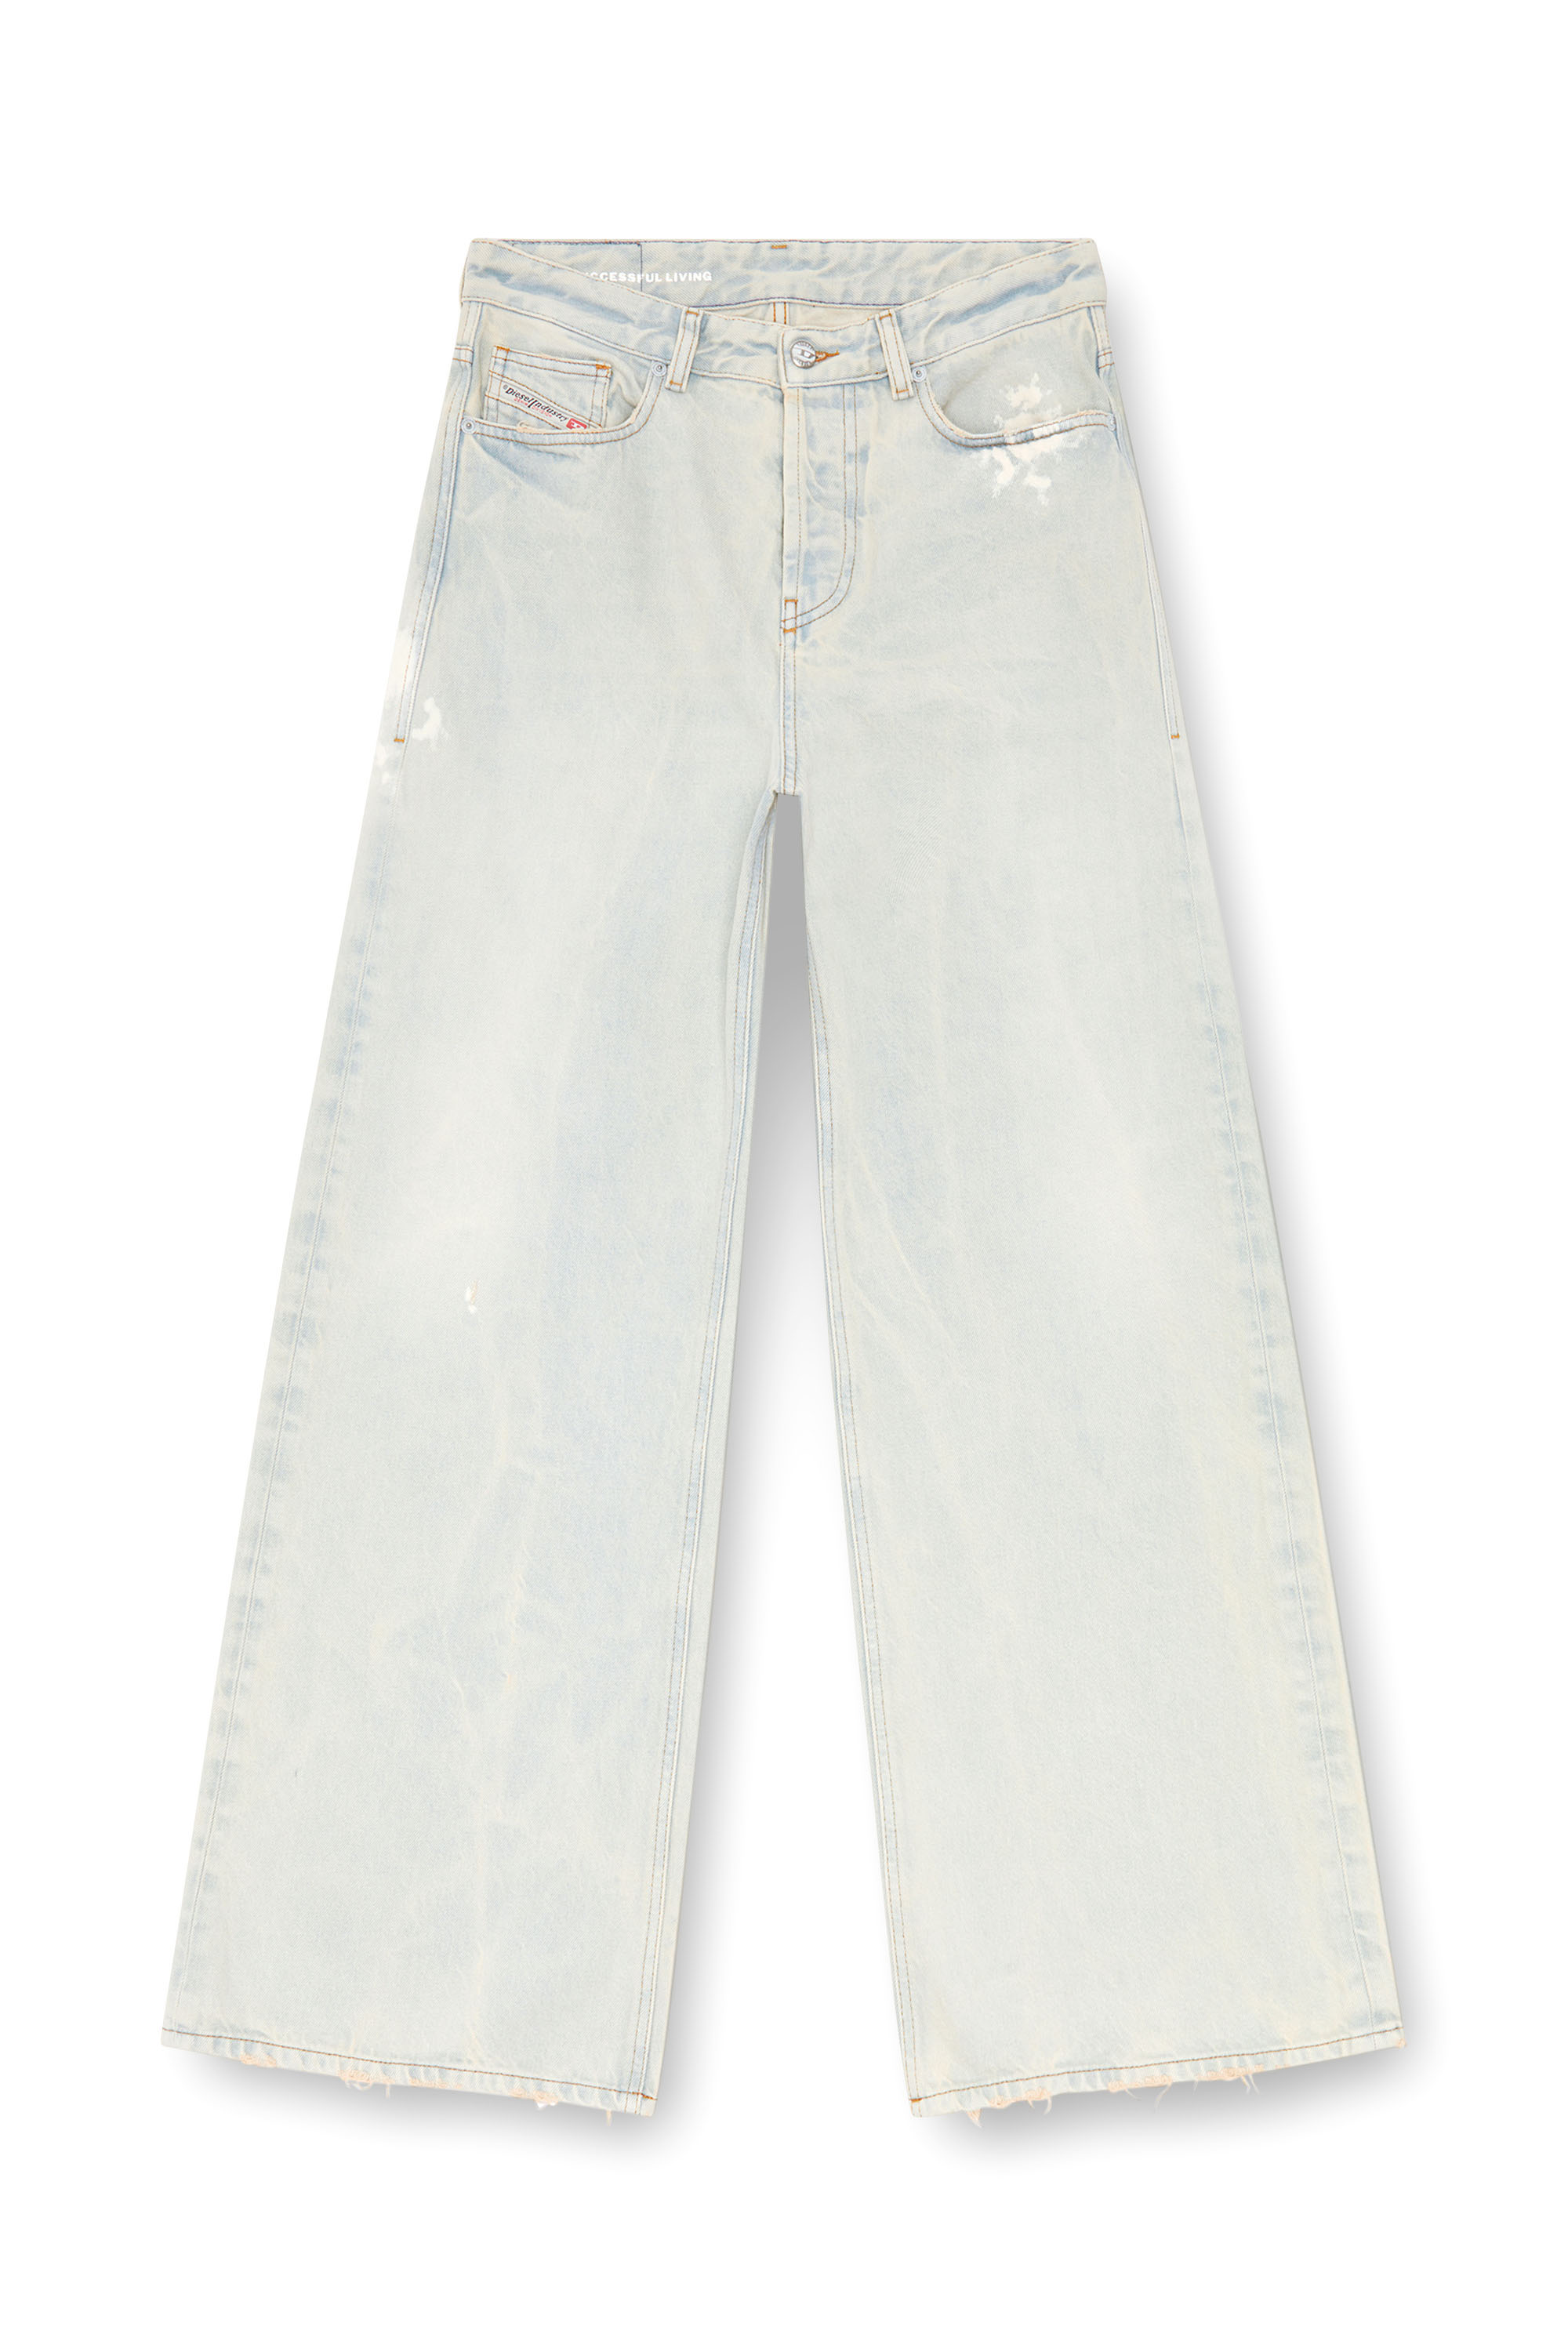 Diesel - Straight Jeans 1996 D-Sire 09J81, Mujer Straight Jeans - 1996 D-Sire in Azul marino - Image 1